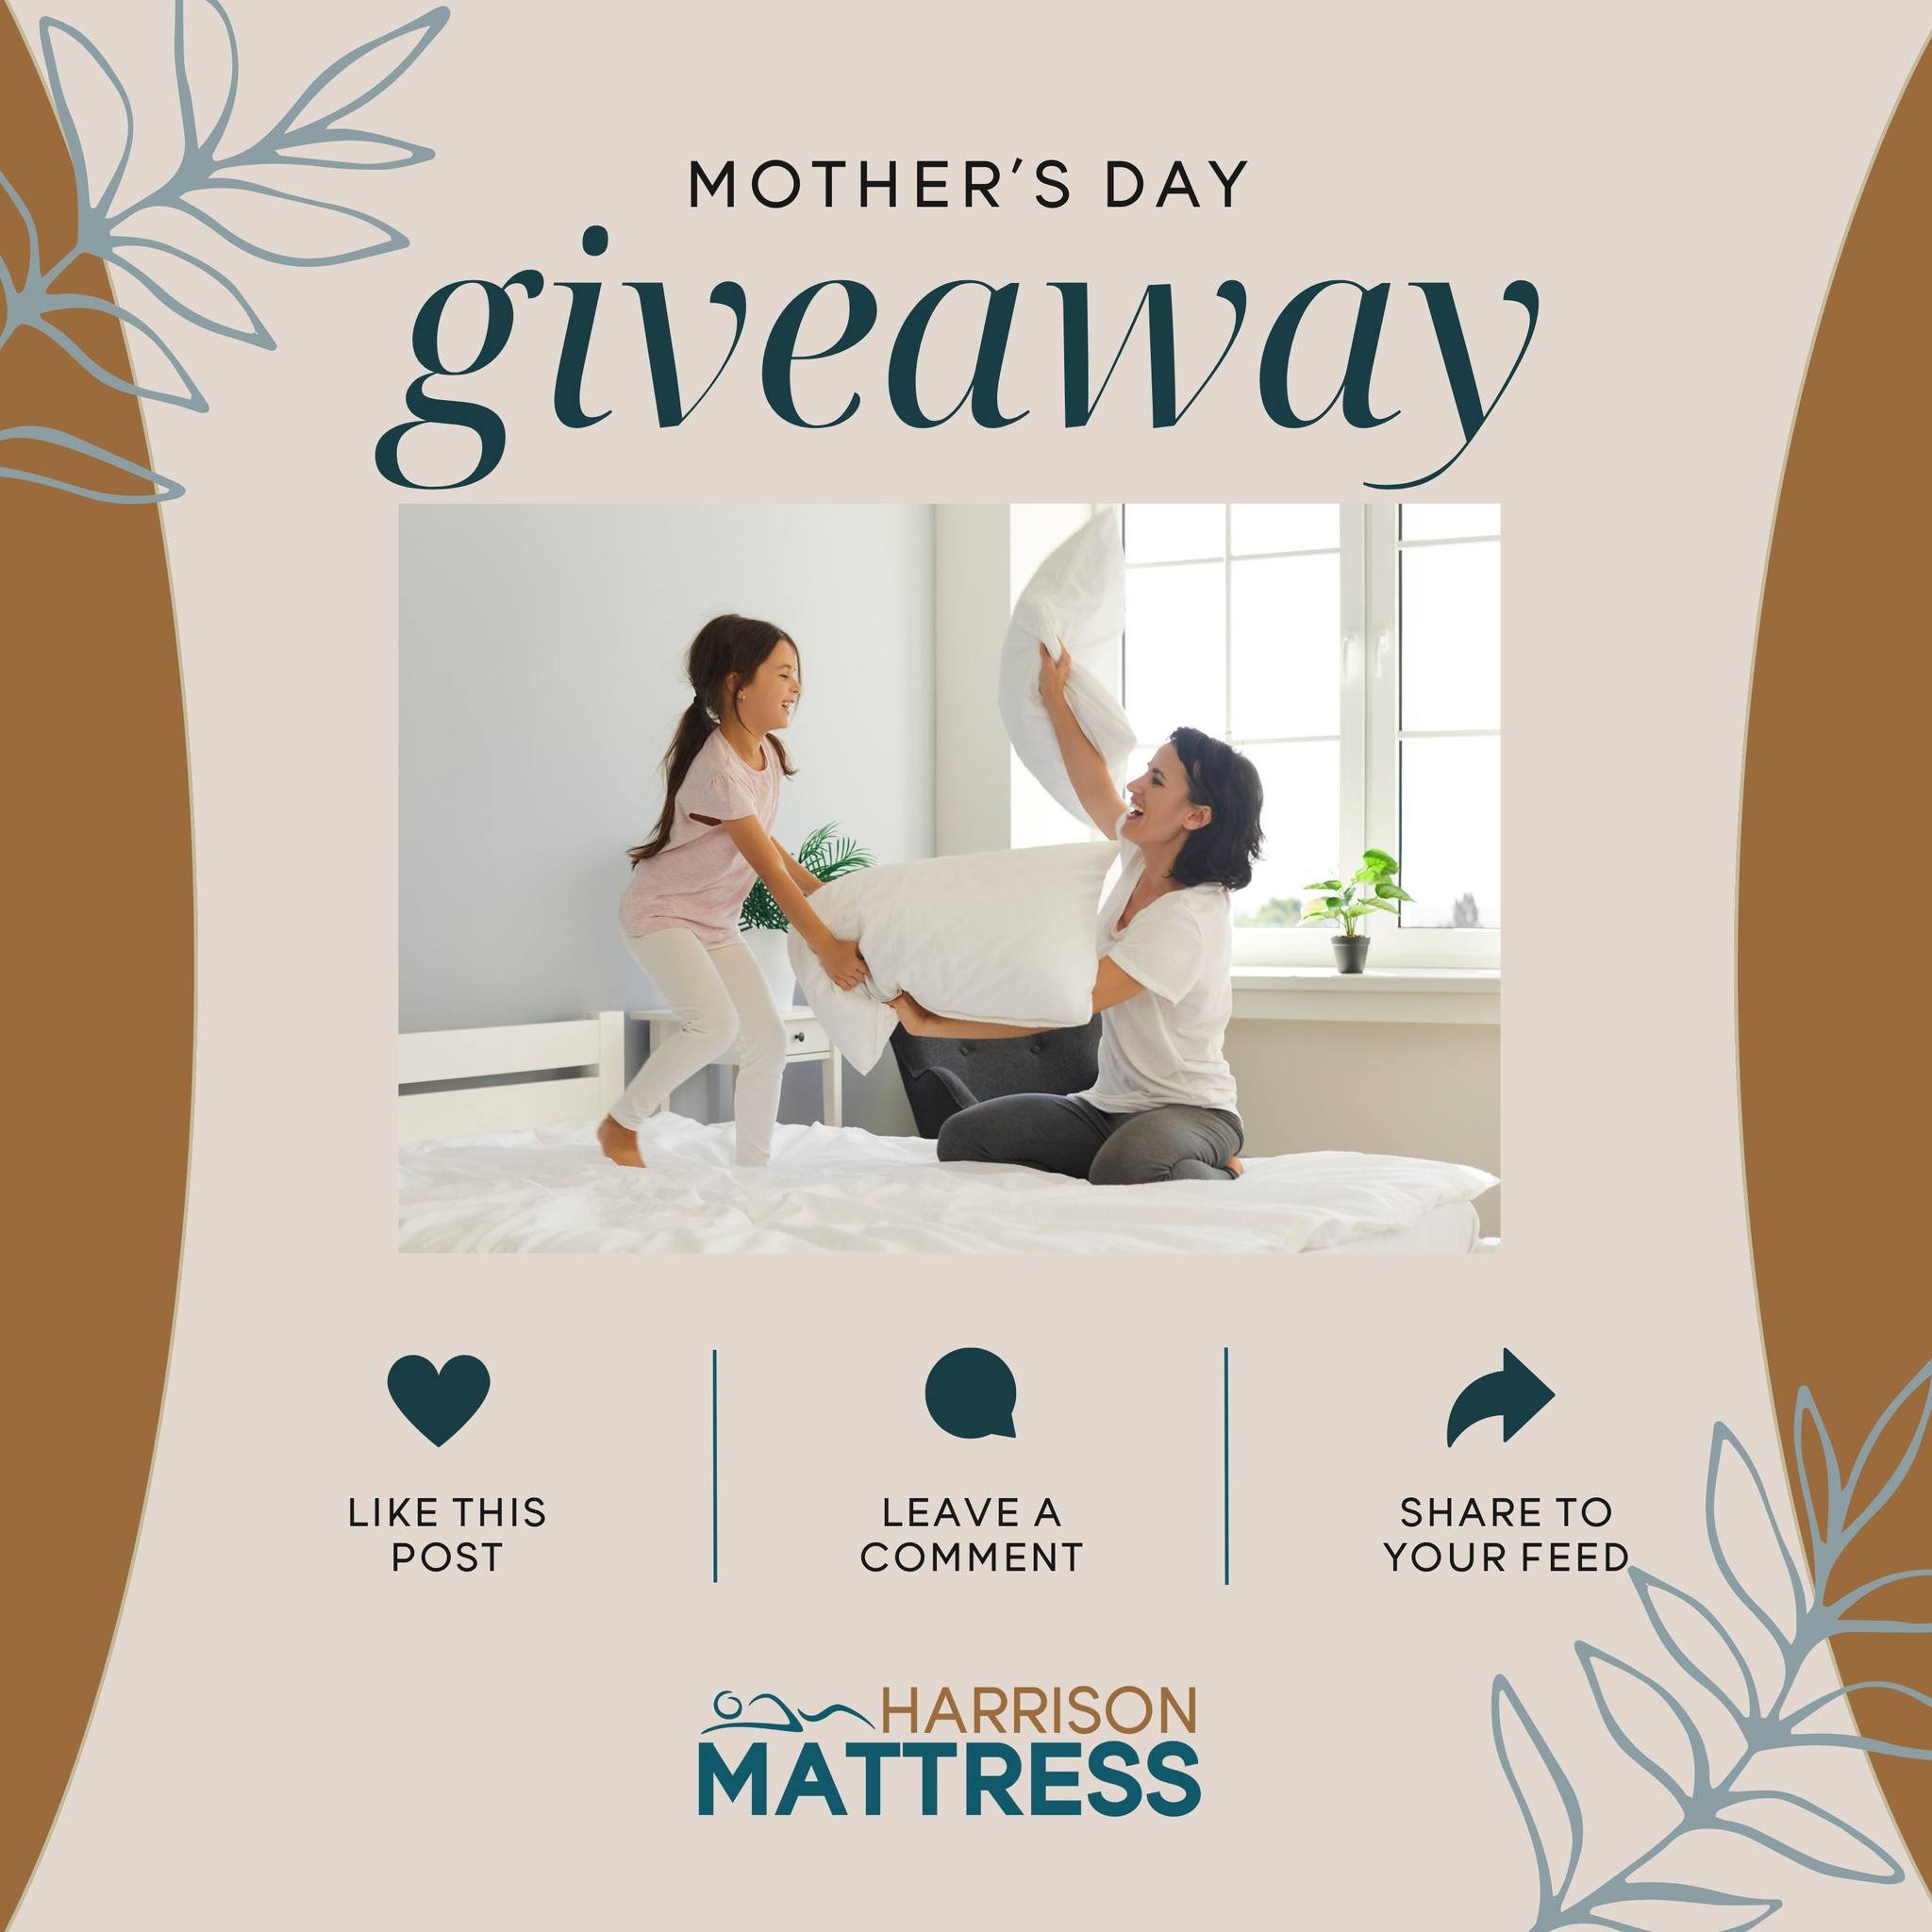 🌼 MOTHER'S DAY GIVEAWAY🌼

💤 Give Mom the gift of sweet dreams this Mother's Day with a free Snow Classic Pillow for your incredible mom. Here's how:
1️⃣ Like this post to show your love.
2️⃣ Comment below telling us why your mom is amazing and des